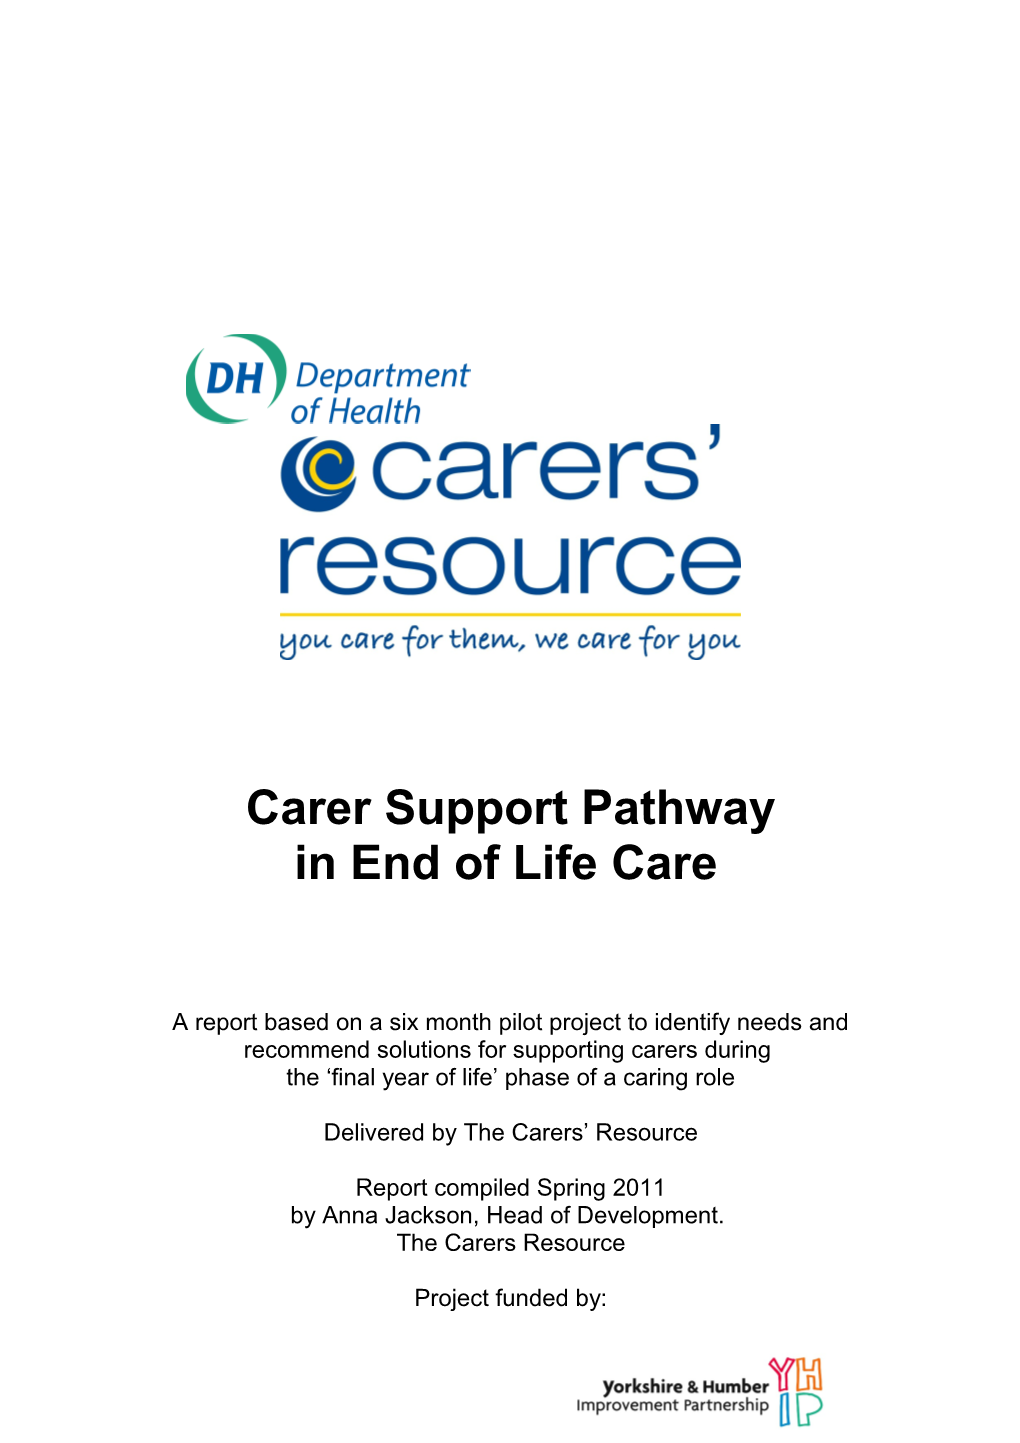 Carer Support Pathways at End of Life